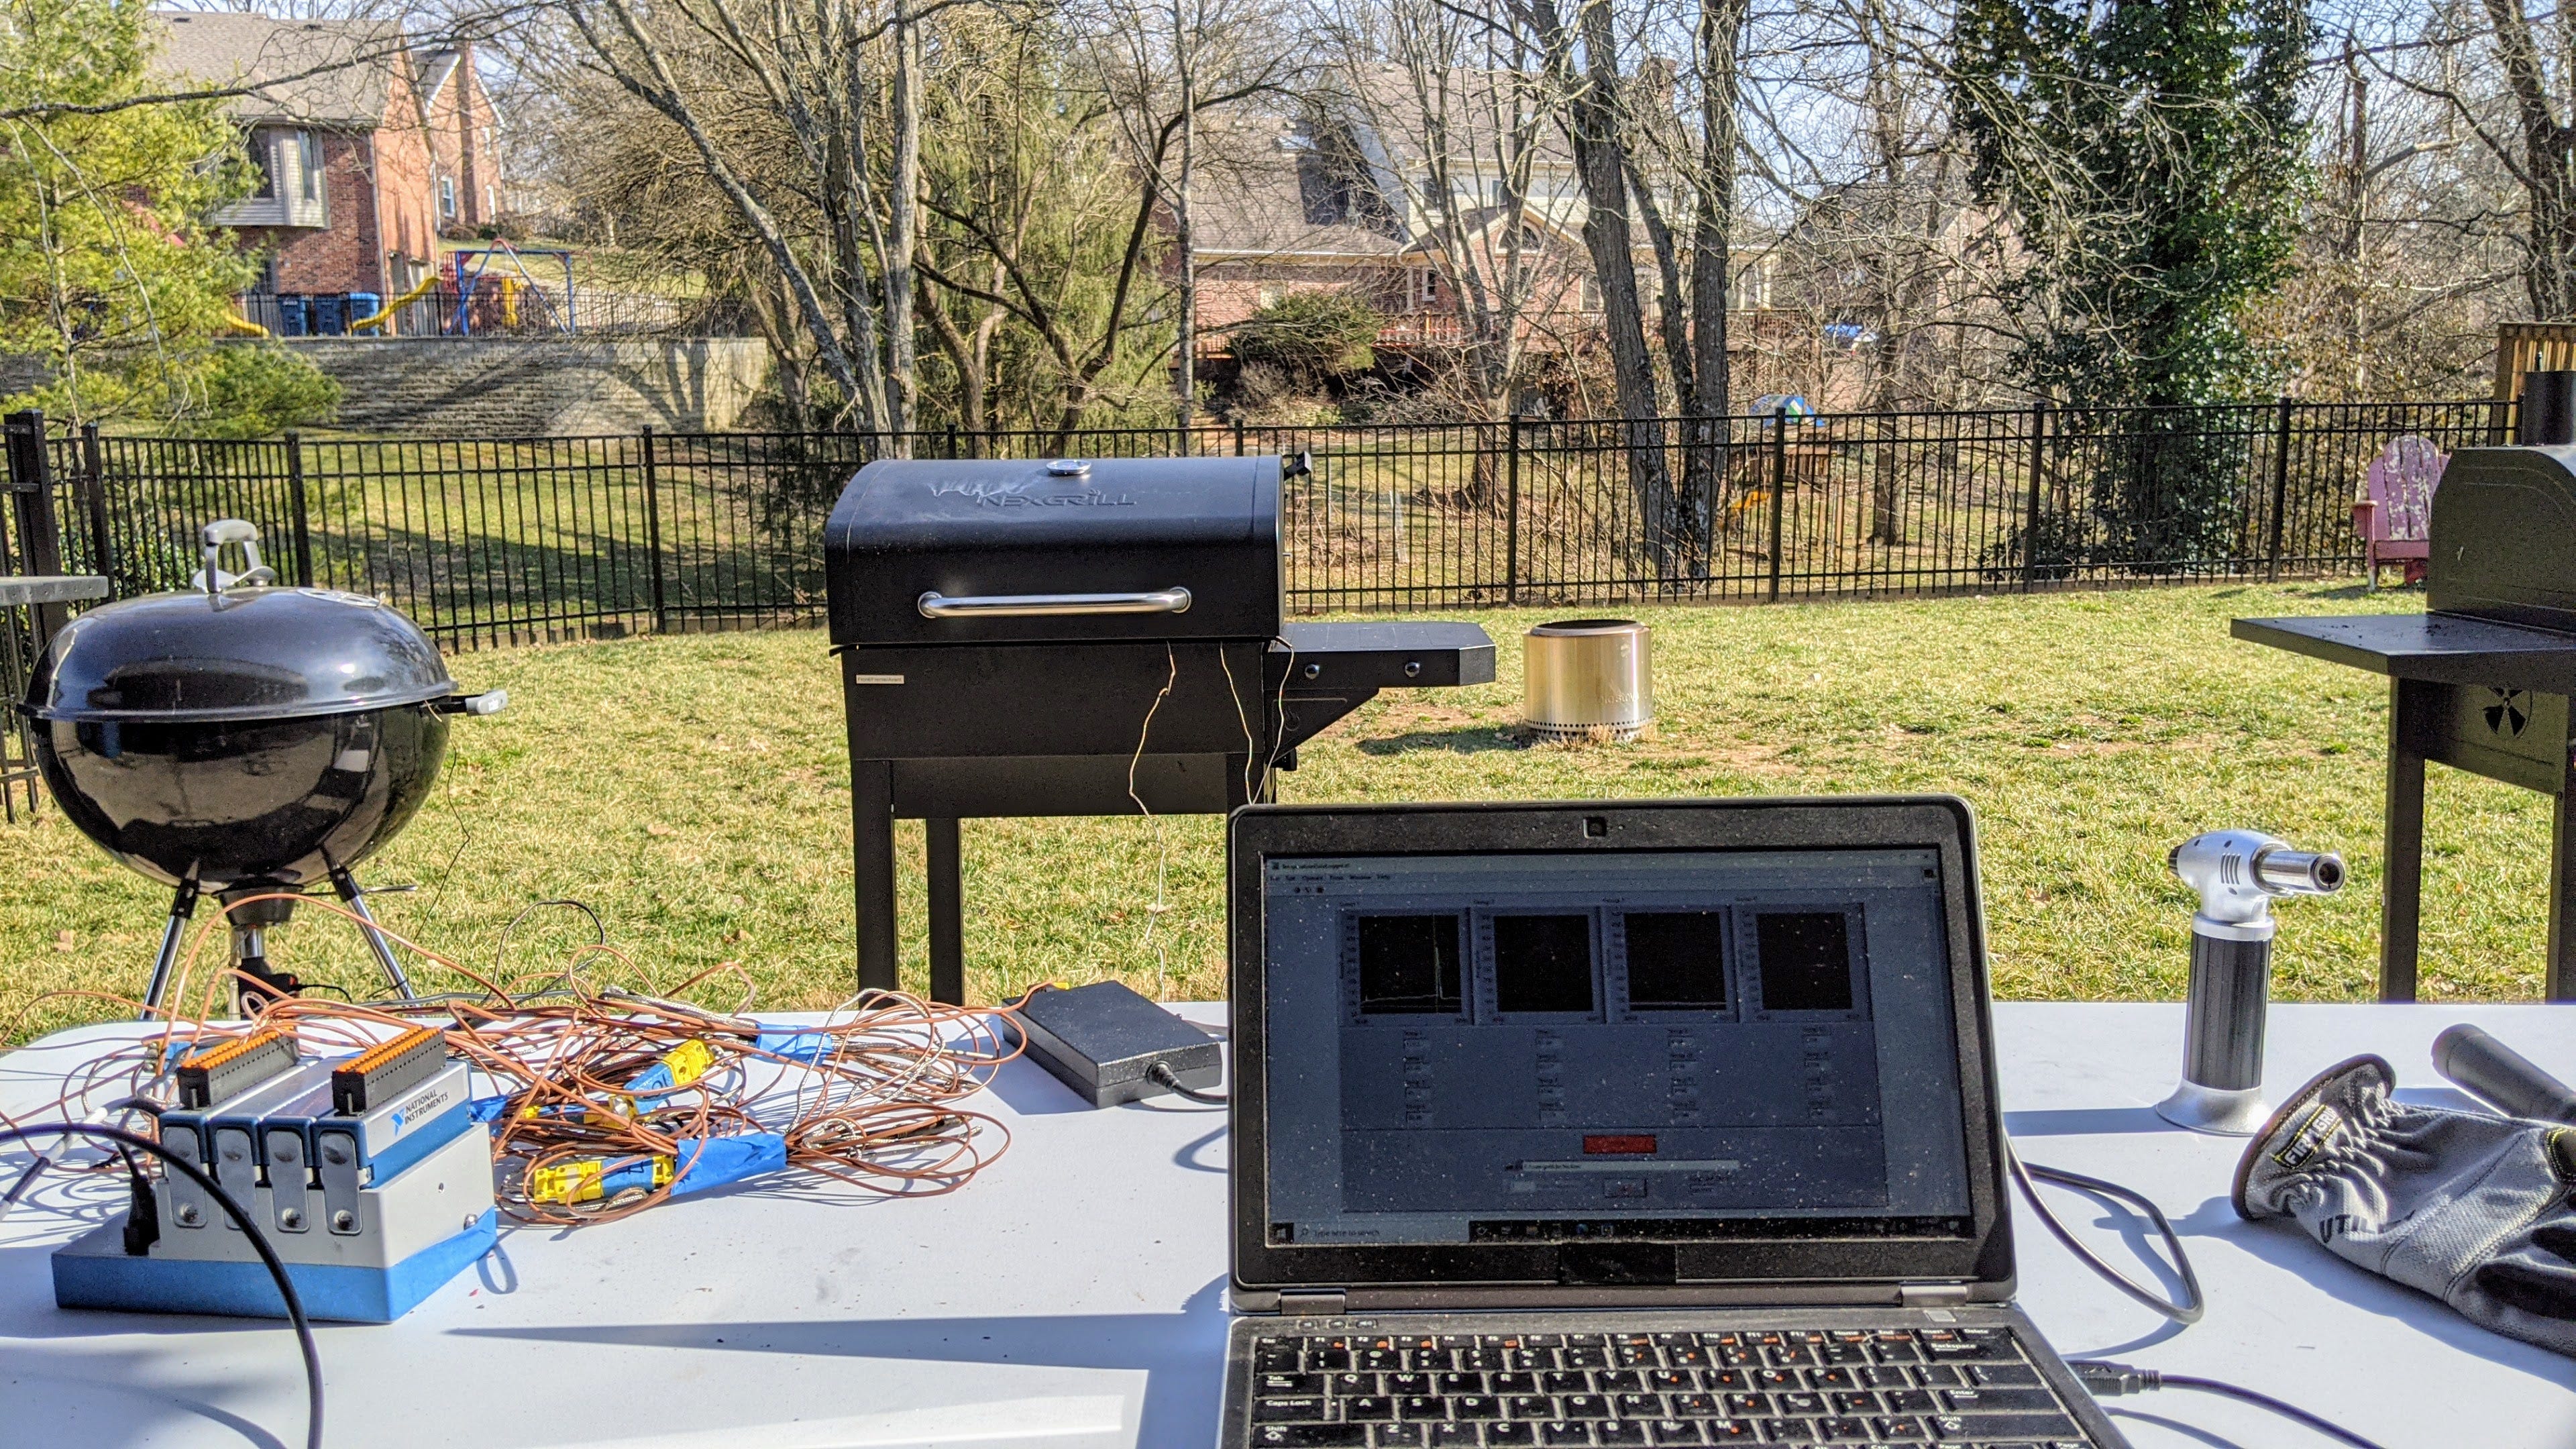 How we test grills: Four grills in an outdoor setting